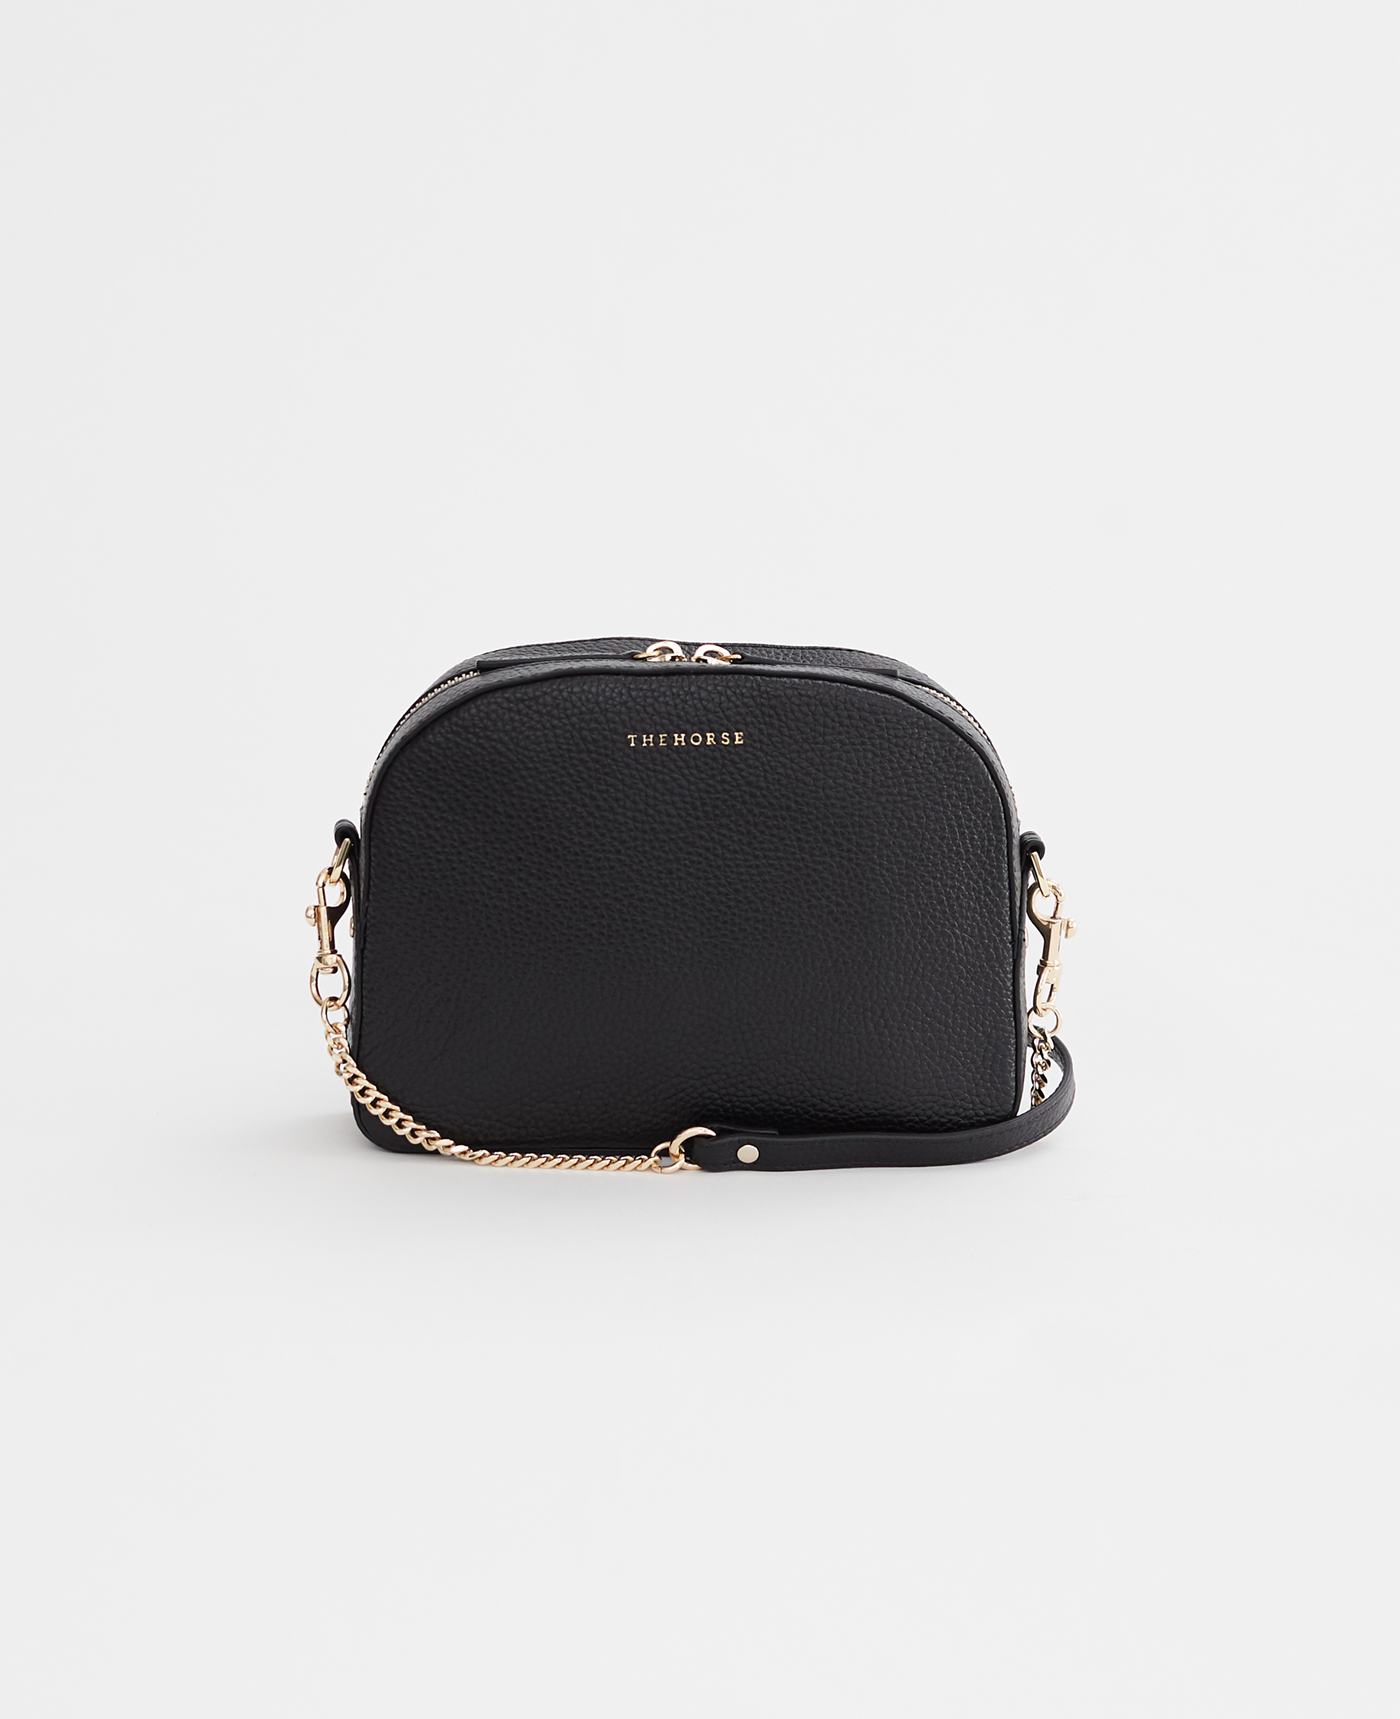 The Dome Bag: Women's Black Leather Handbag by The Horse